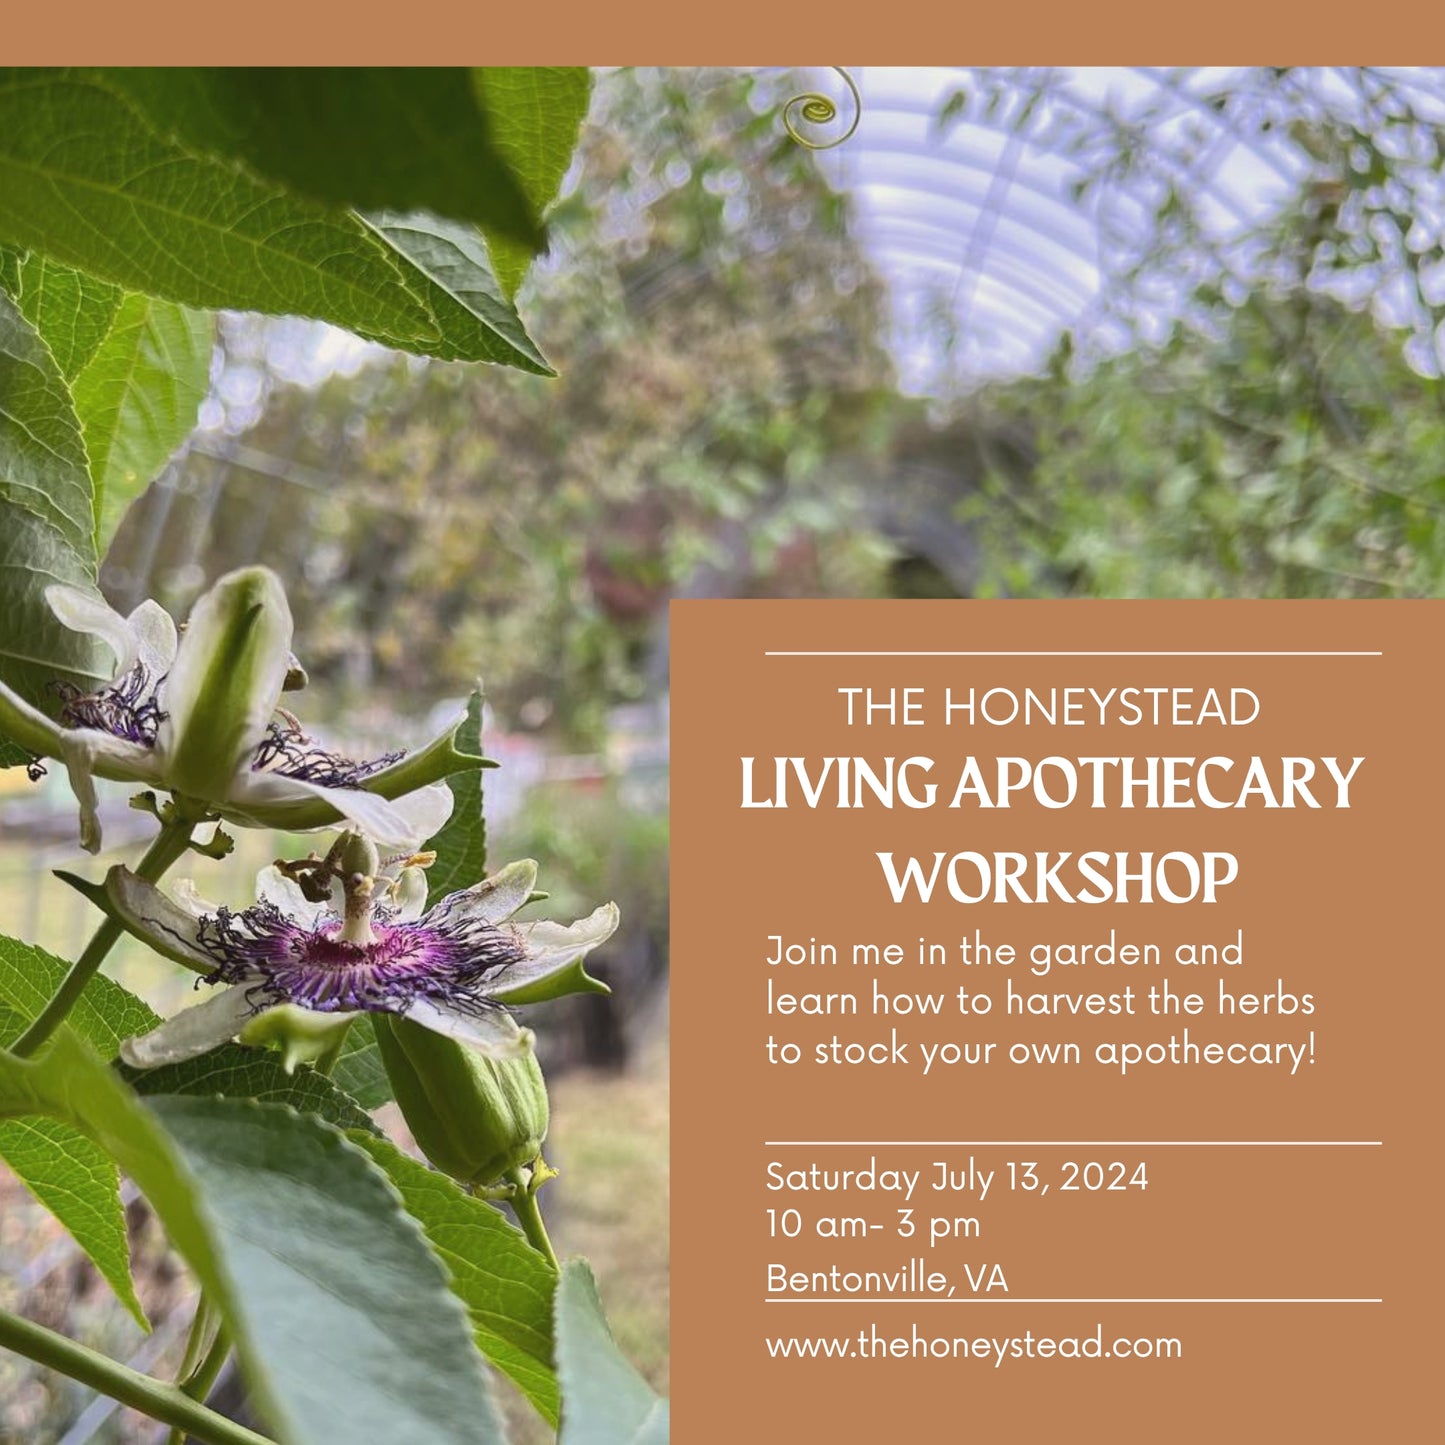 The Living Apothecary Workshop